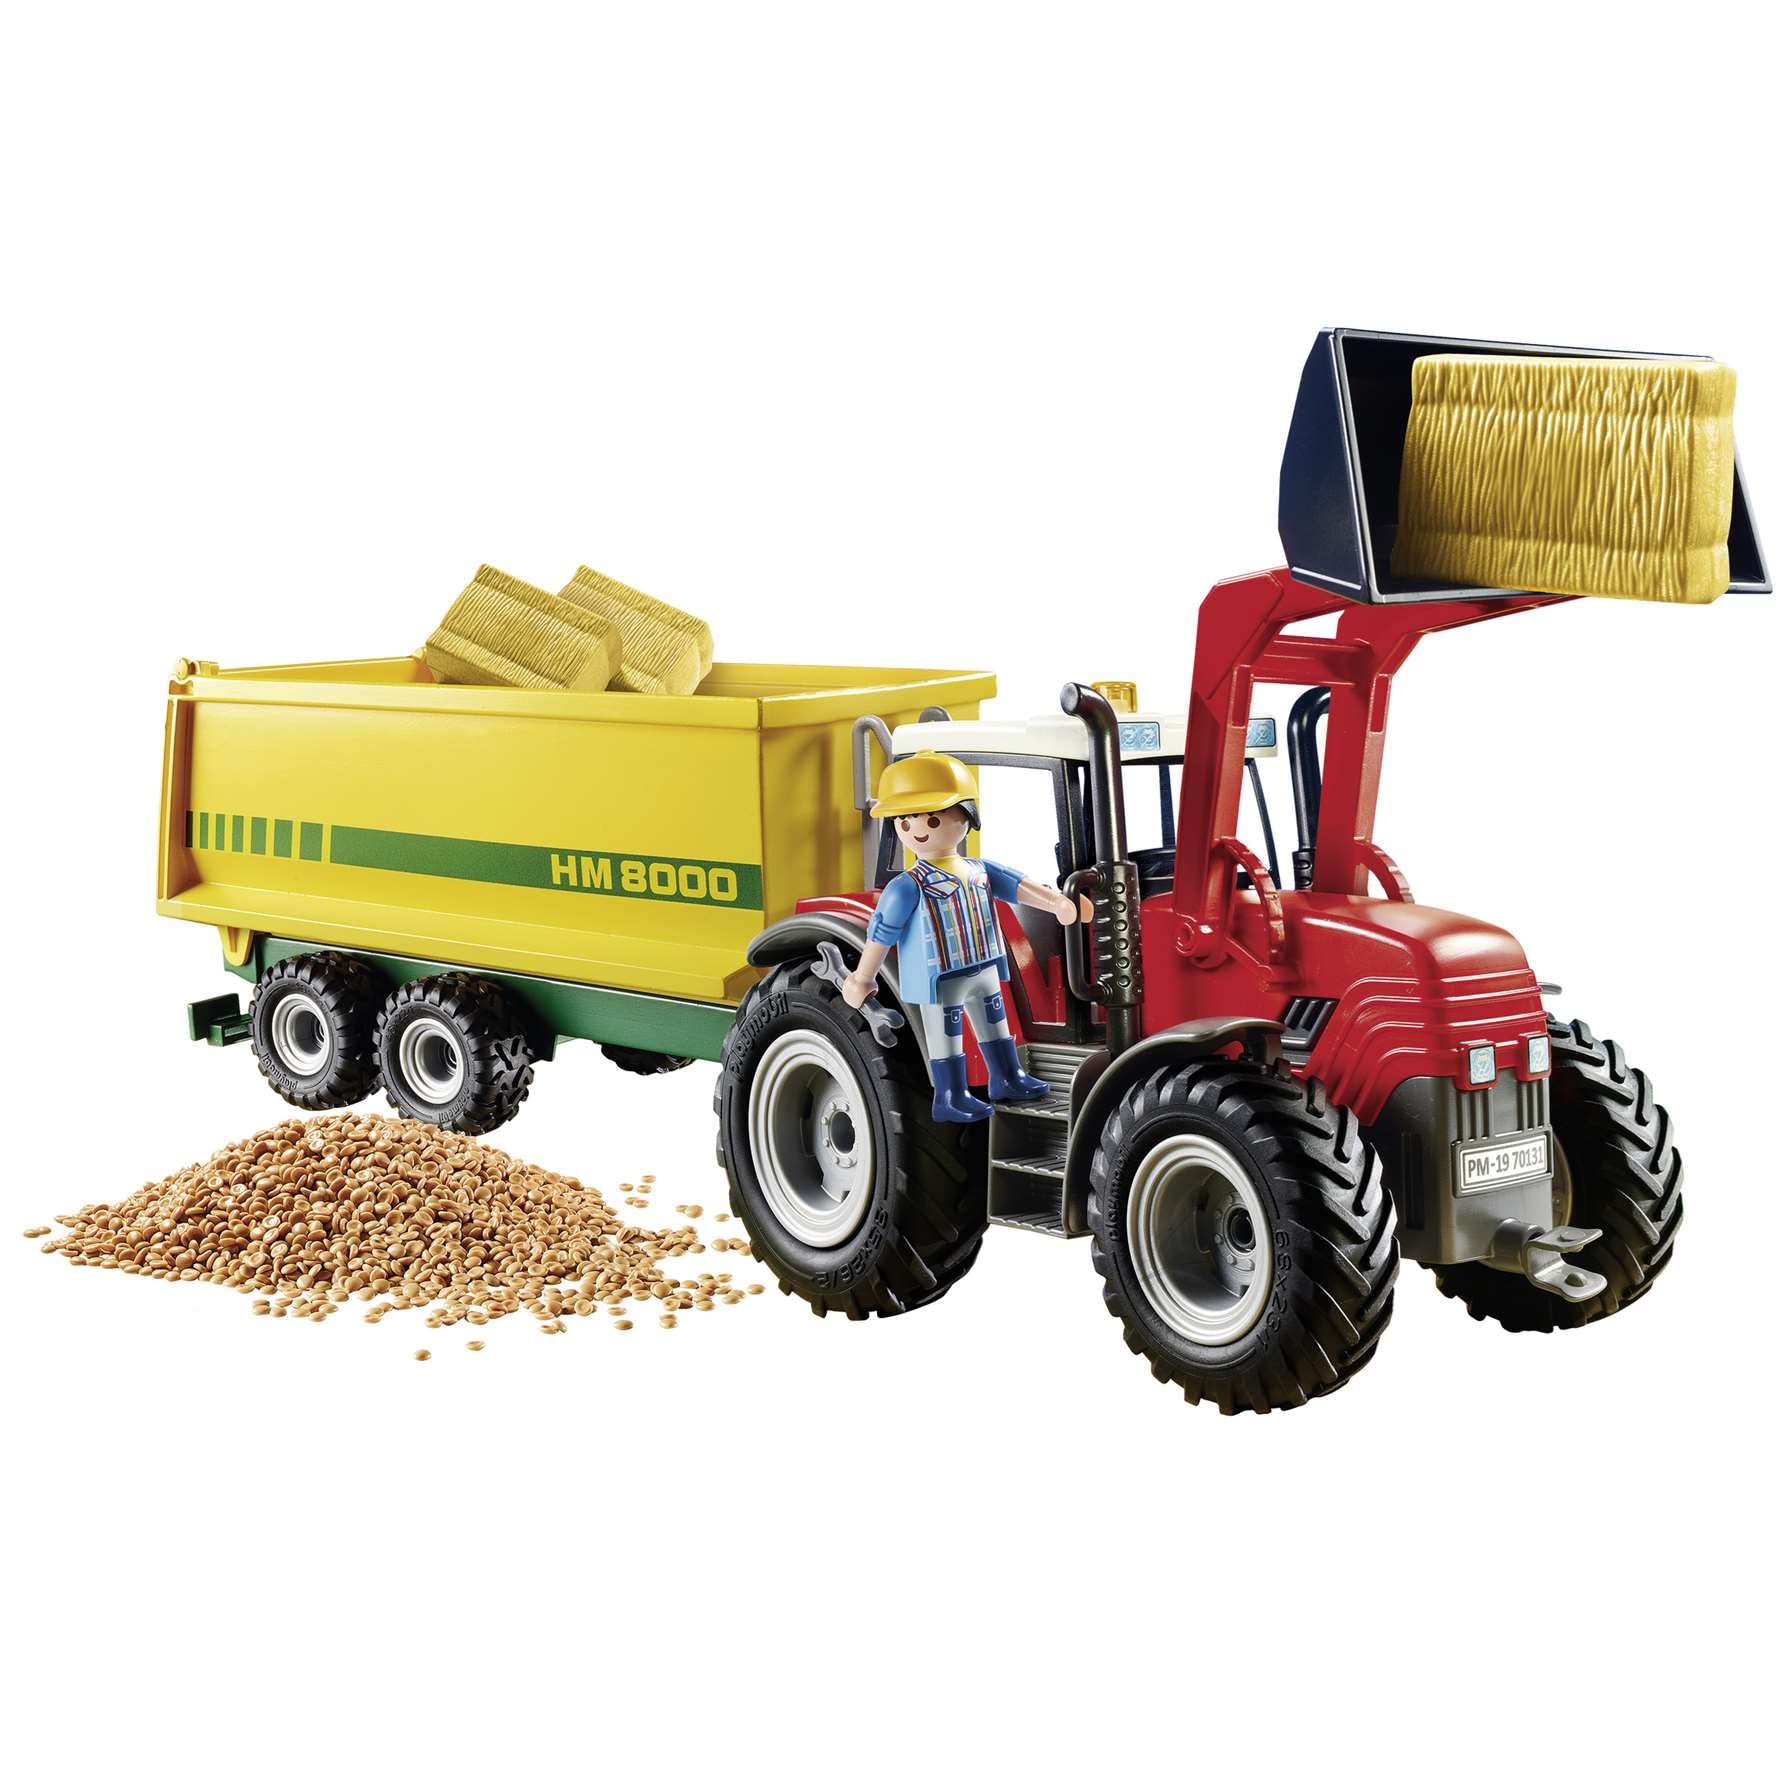 PLAYMOBIL Country 70131 Farm Tractor with Feed Trailer, with Mobile Front Loader, Toys for Children Ages 4+